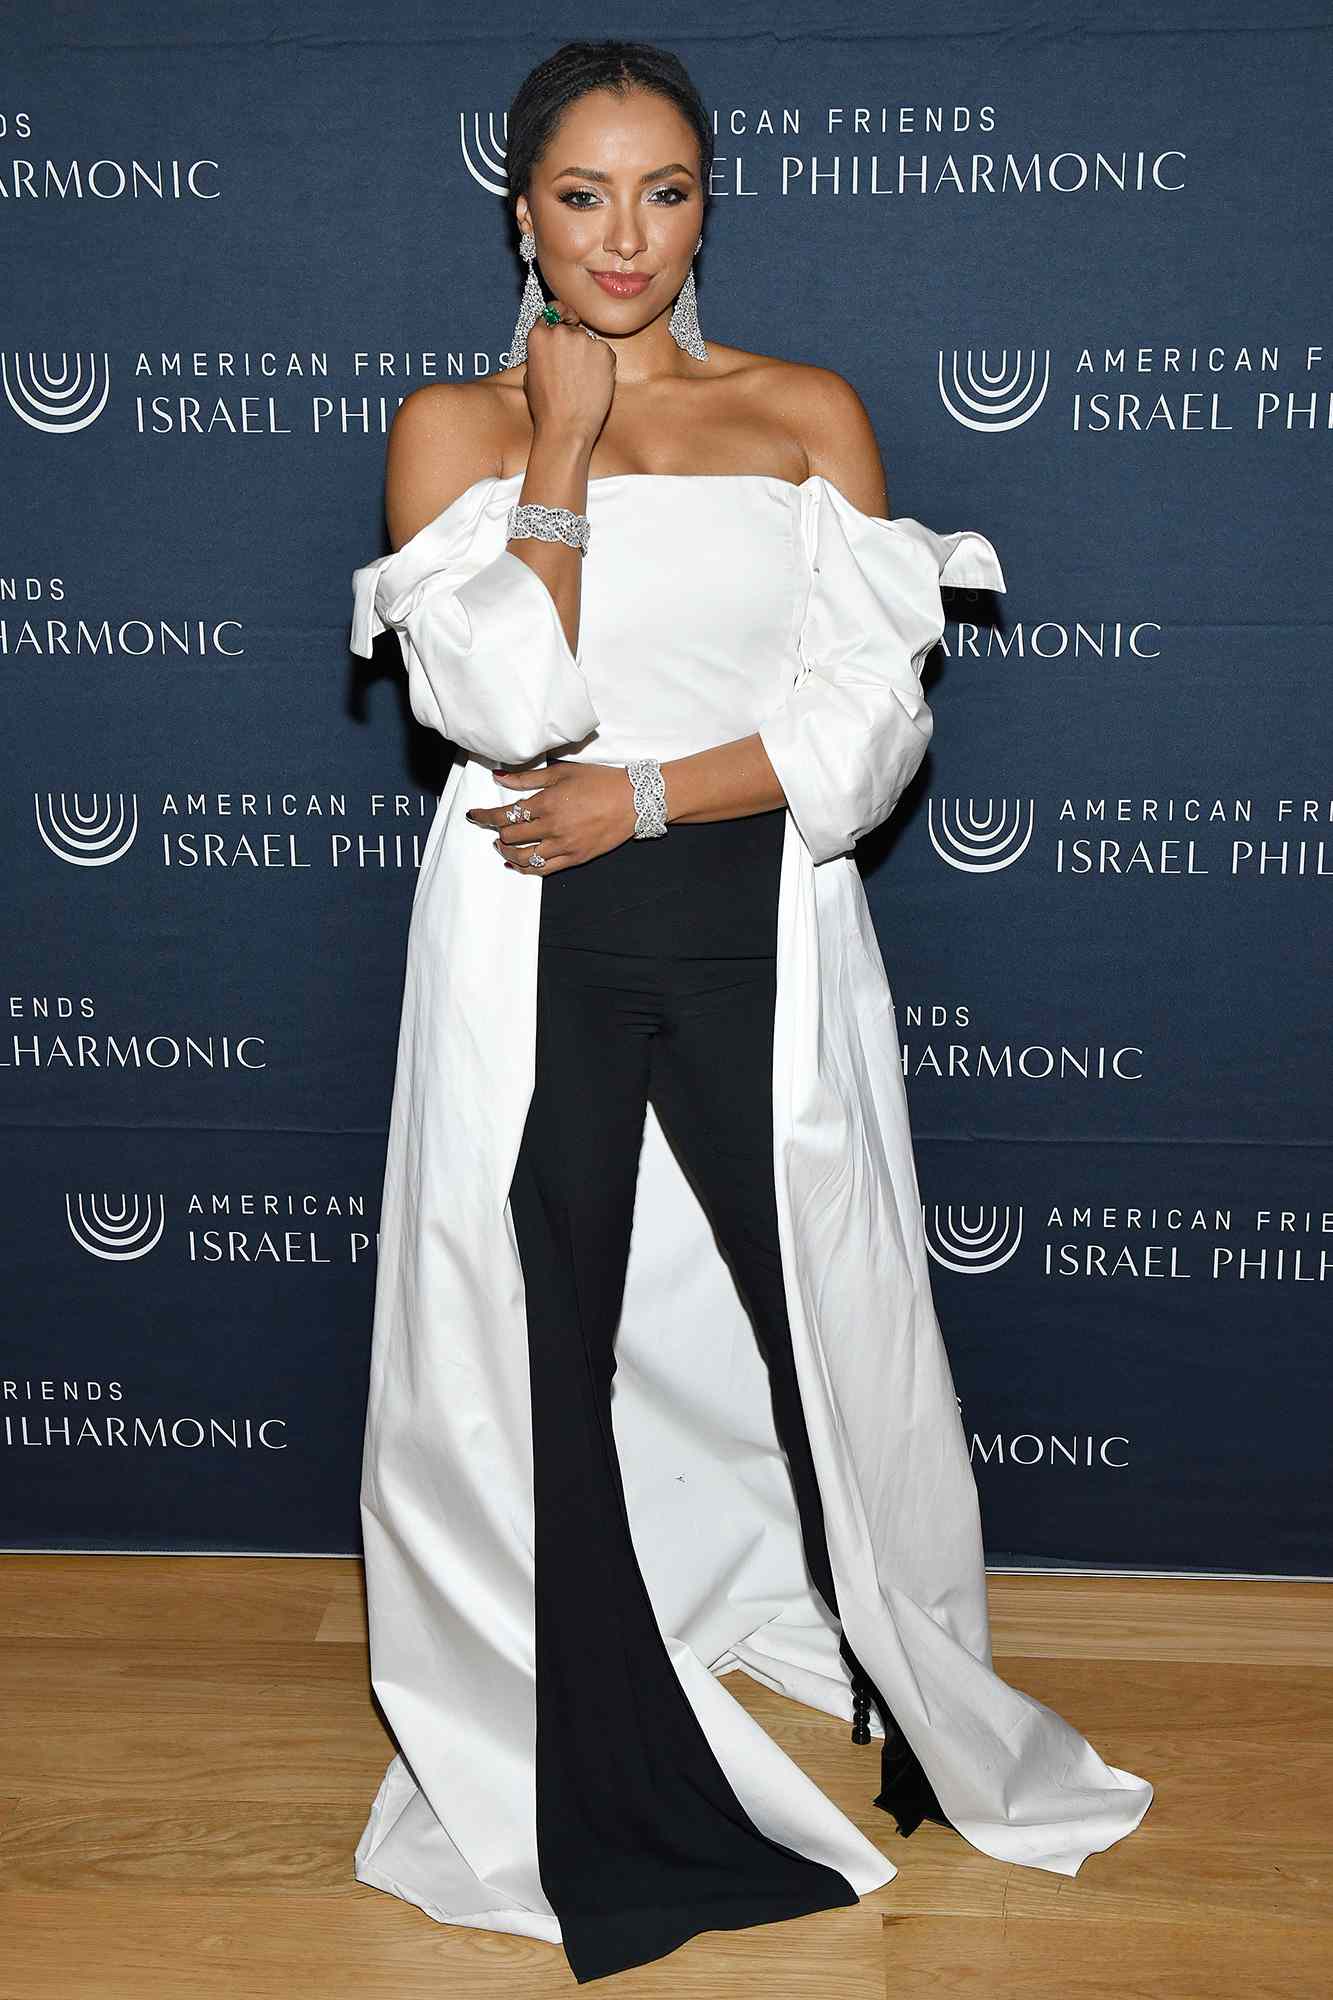 NEW YORK, NEW YORK - DECEMBER 01: Kat Graham attends the American Friends of the Israel Philharmonic New York Gala at The Morgan Library on December 01, 2021 in New York City. (Photo by Craig Barritt/Getty Images for American Friends of the Israel Philharmonic )